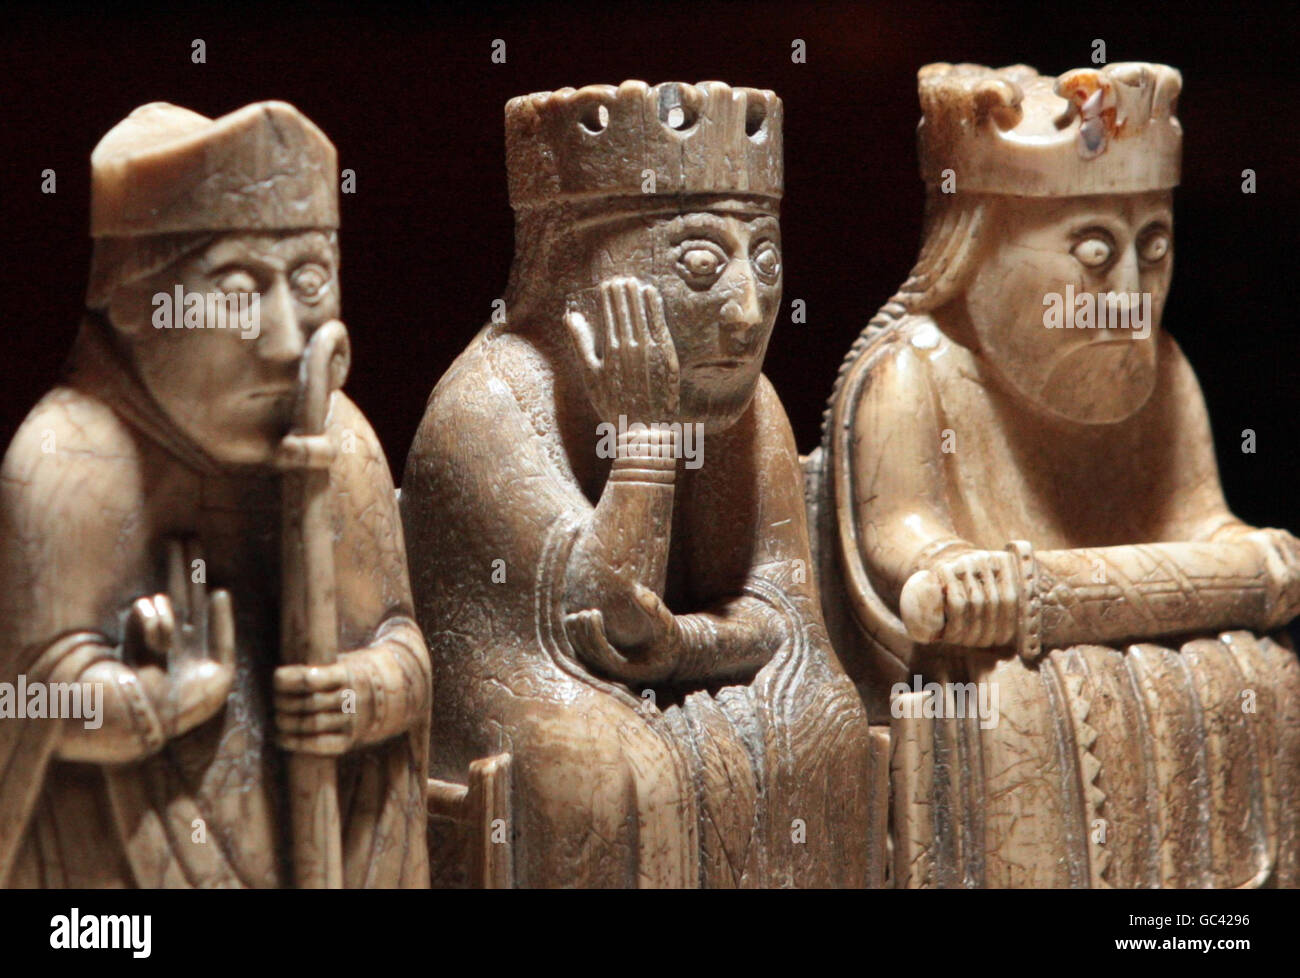 The Lewis Chessmen at the National Museum of Scotland in Edinburgh following an announcement today of a major new touring exhibition of the Chessmen opening May 2010. Stock Photo